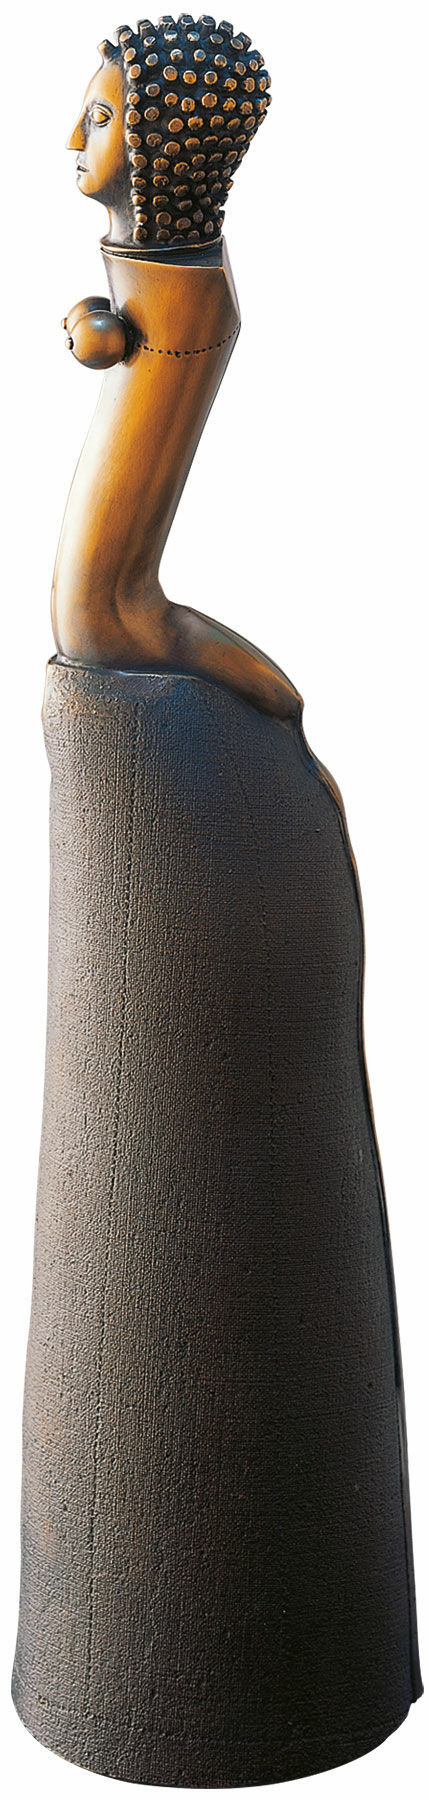 Sculpture "Figurine with Long Skirt", bronze by Paul Wunderlich